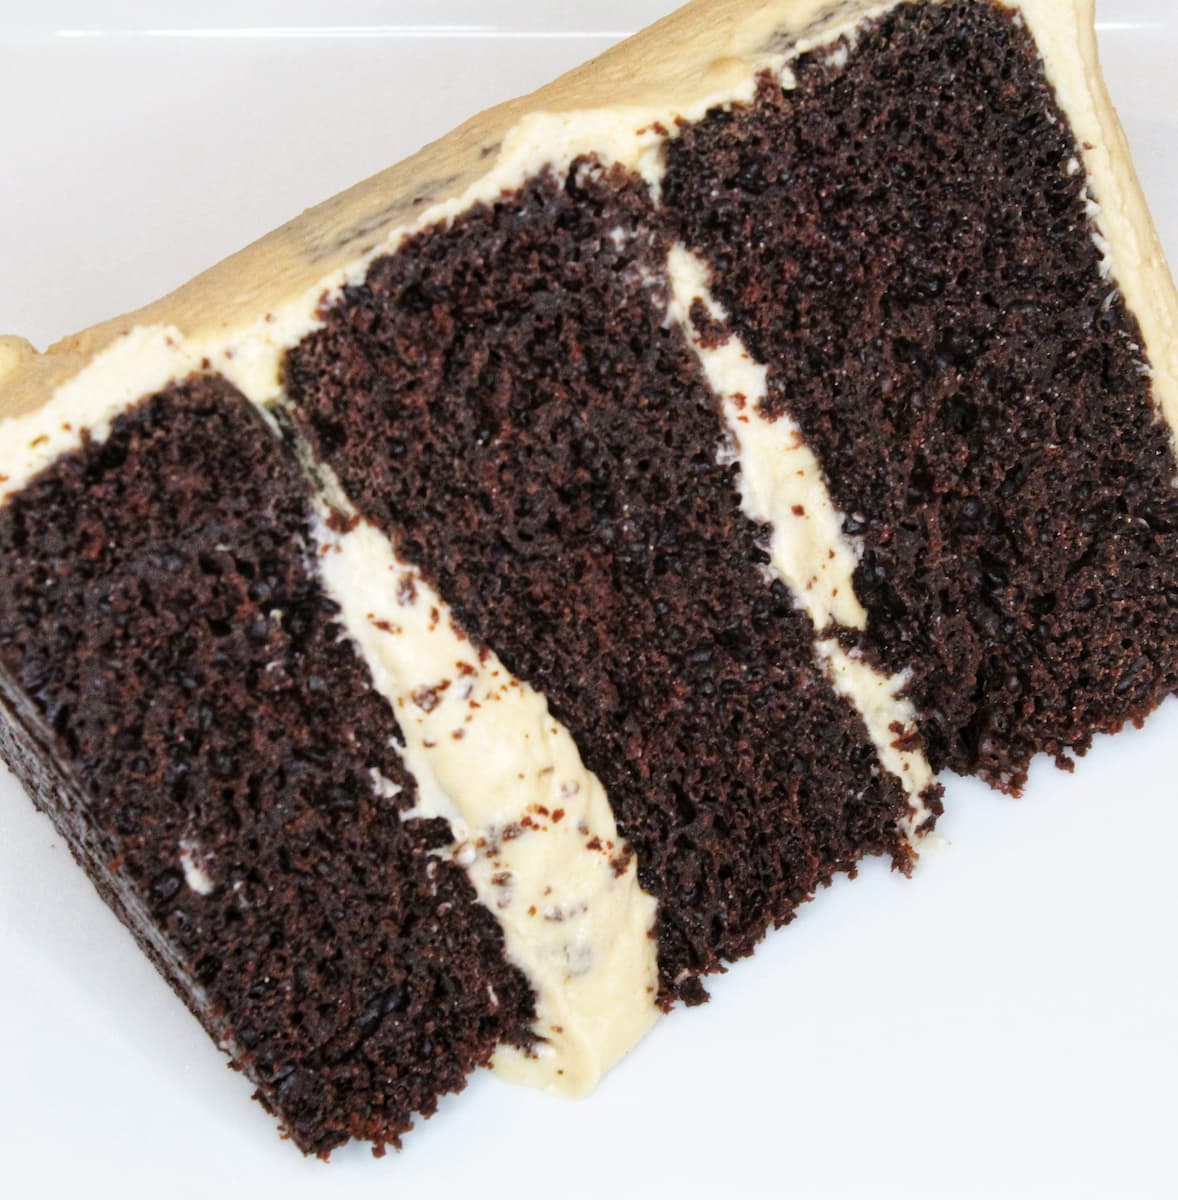 Three layer chocolate cake with whipped peanut butter frosting. Recipe for the frosting is from cleveland cooking.